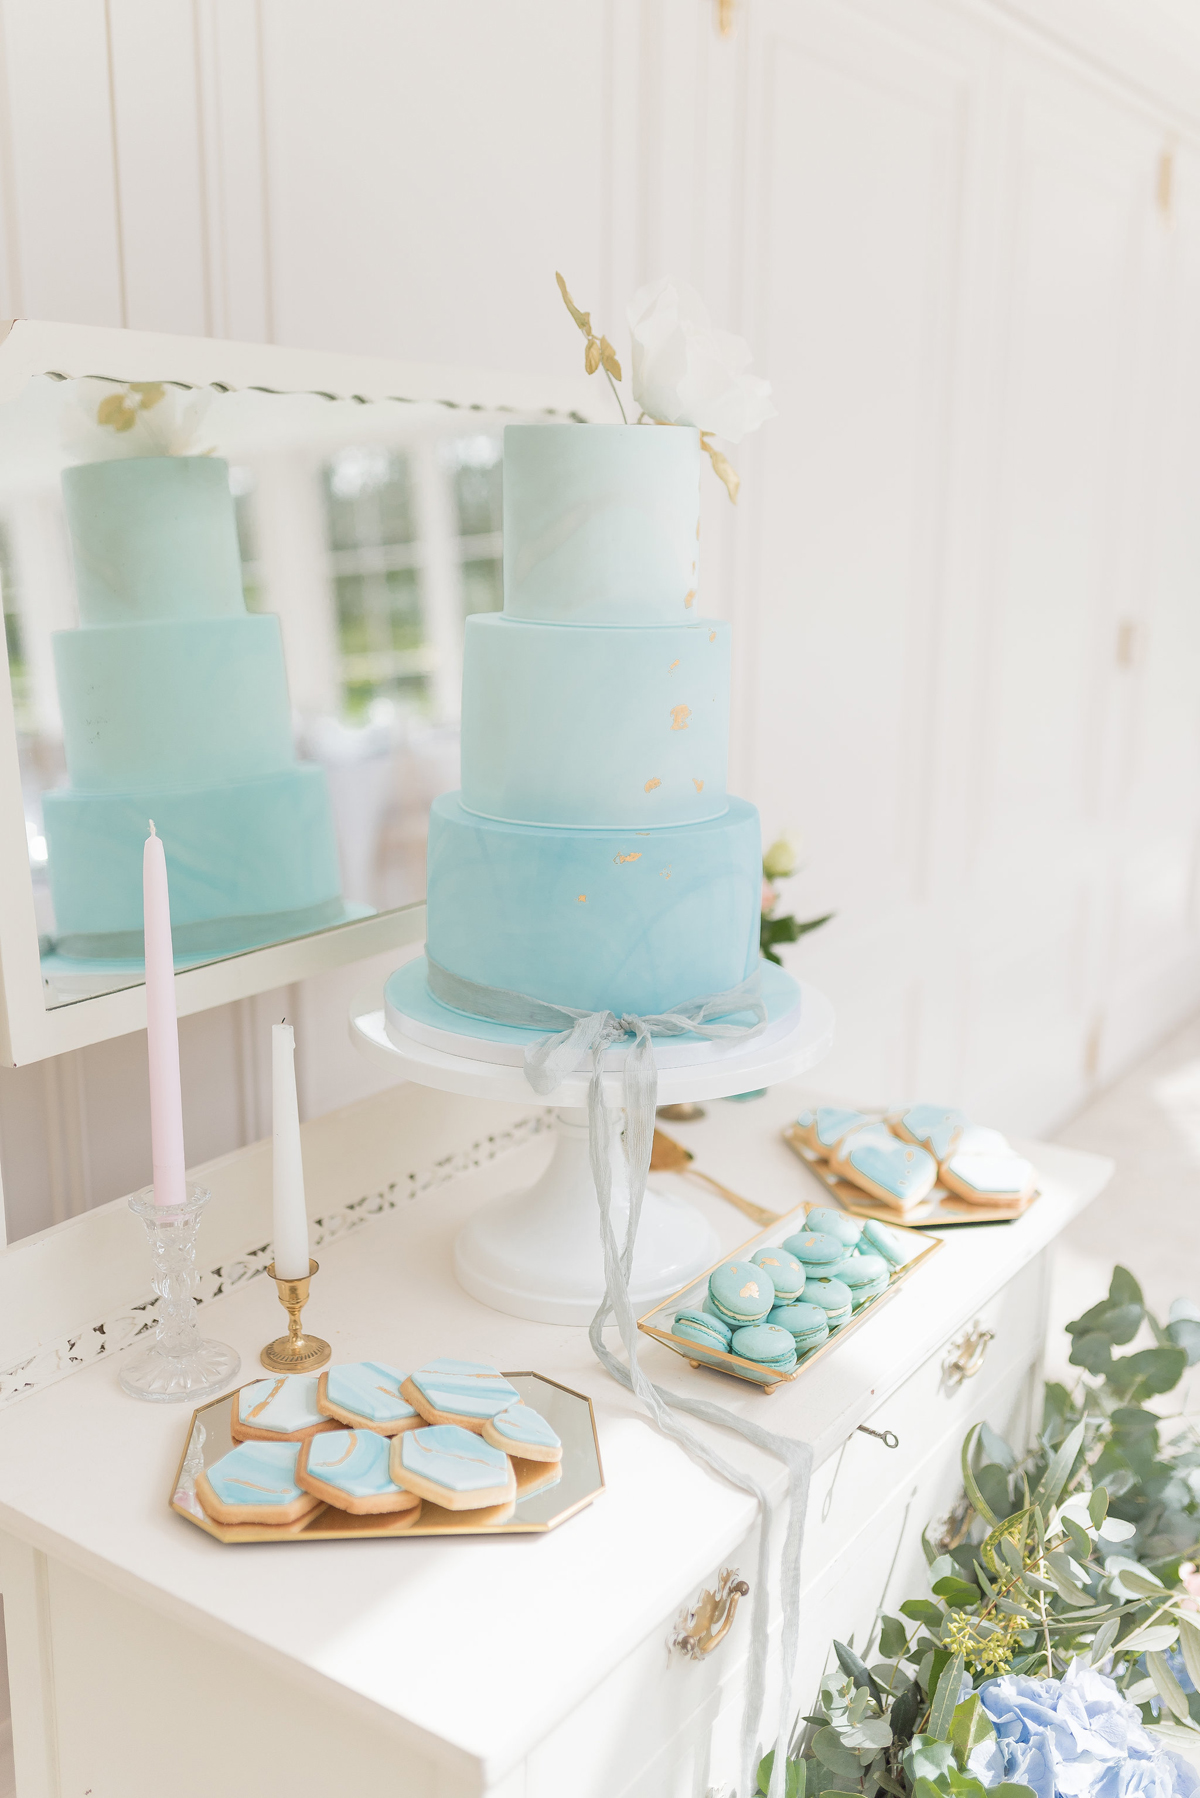 8 Something Blue wedding and bridal inspiration with a handpainted leather jacket